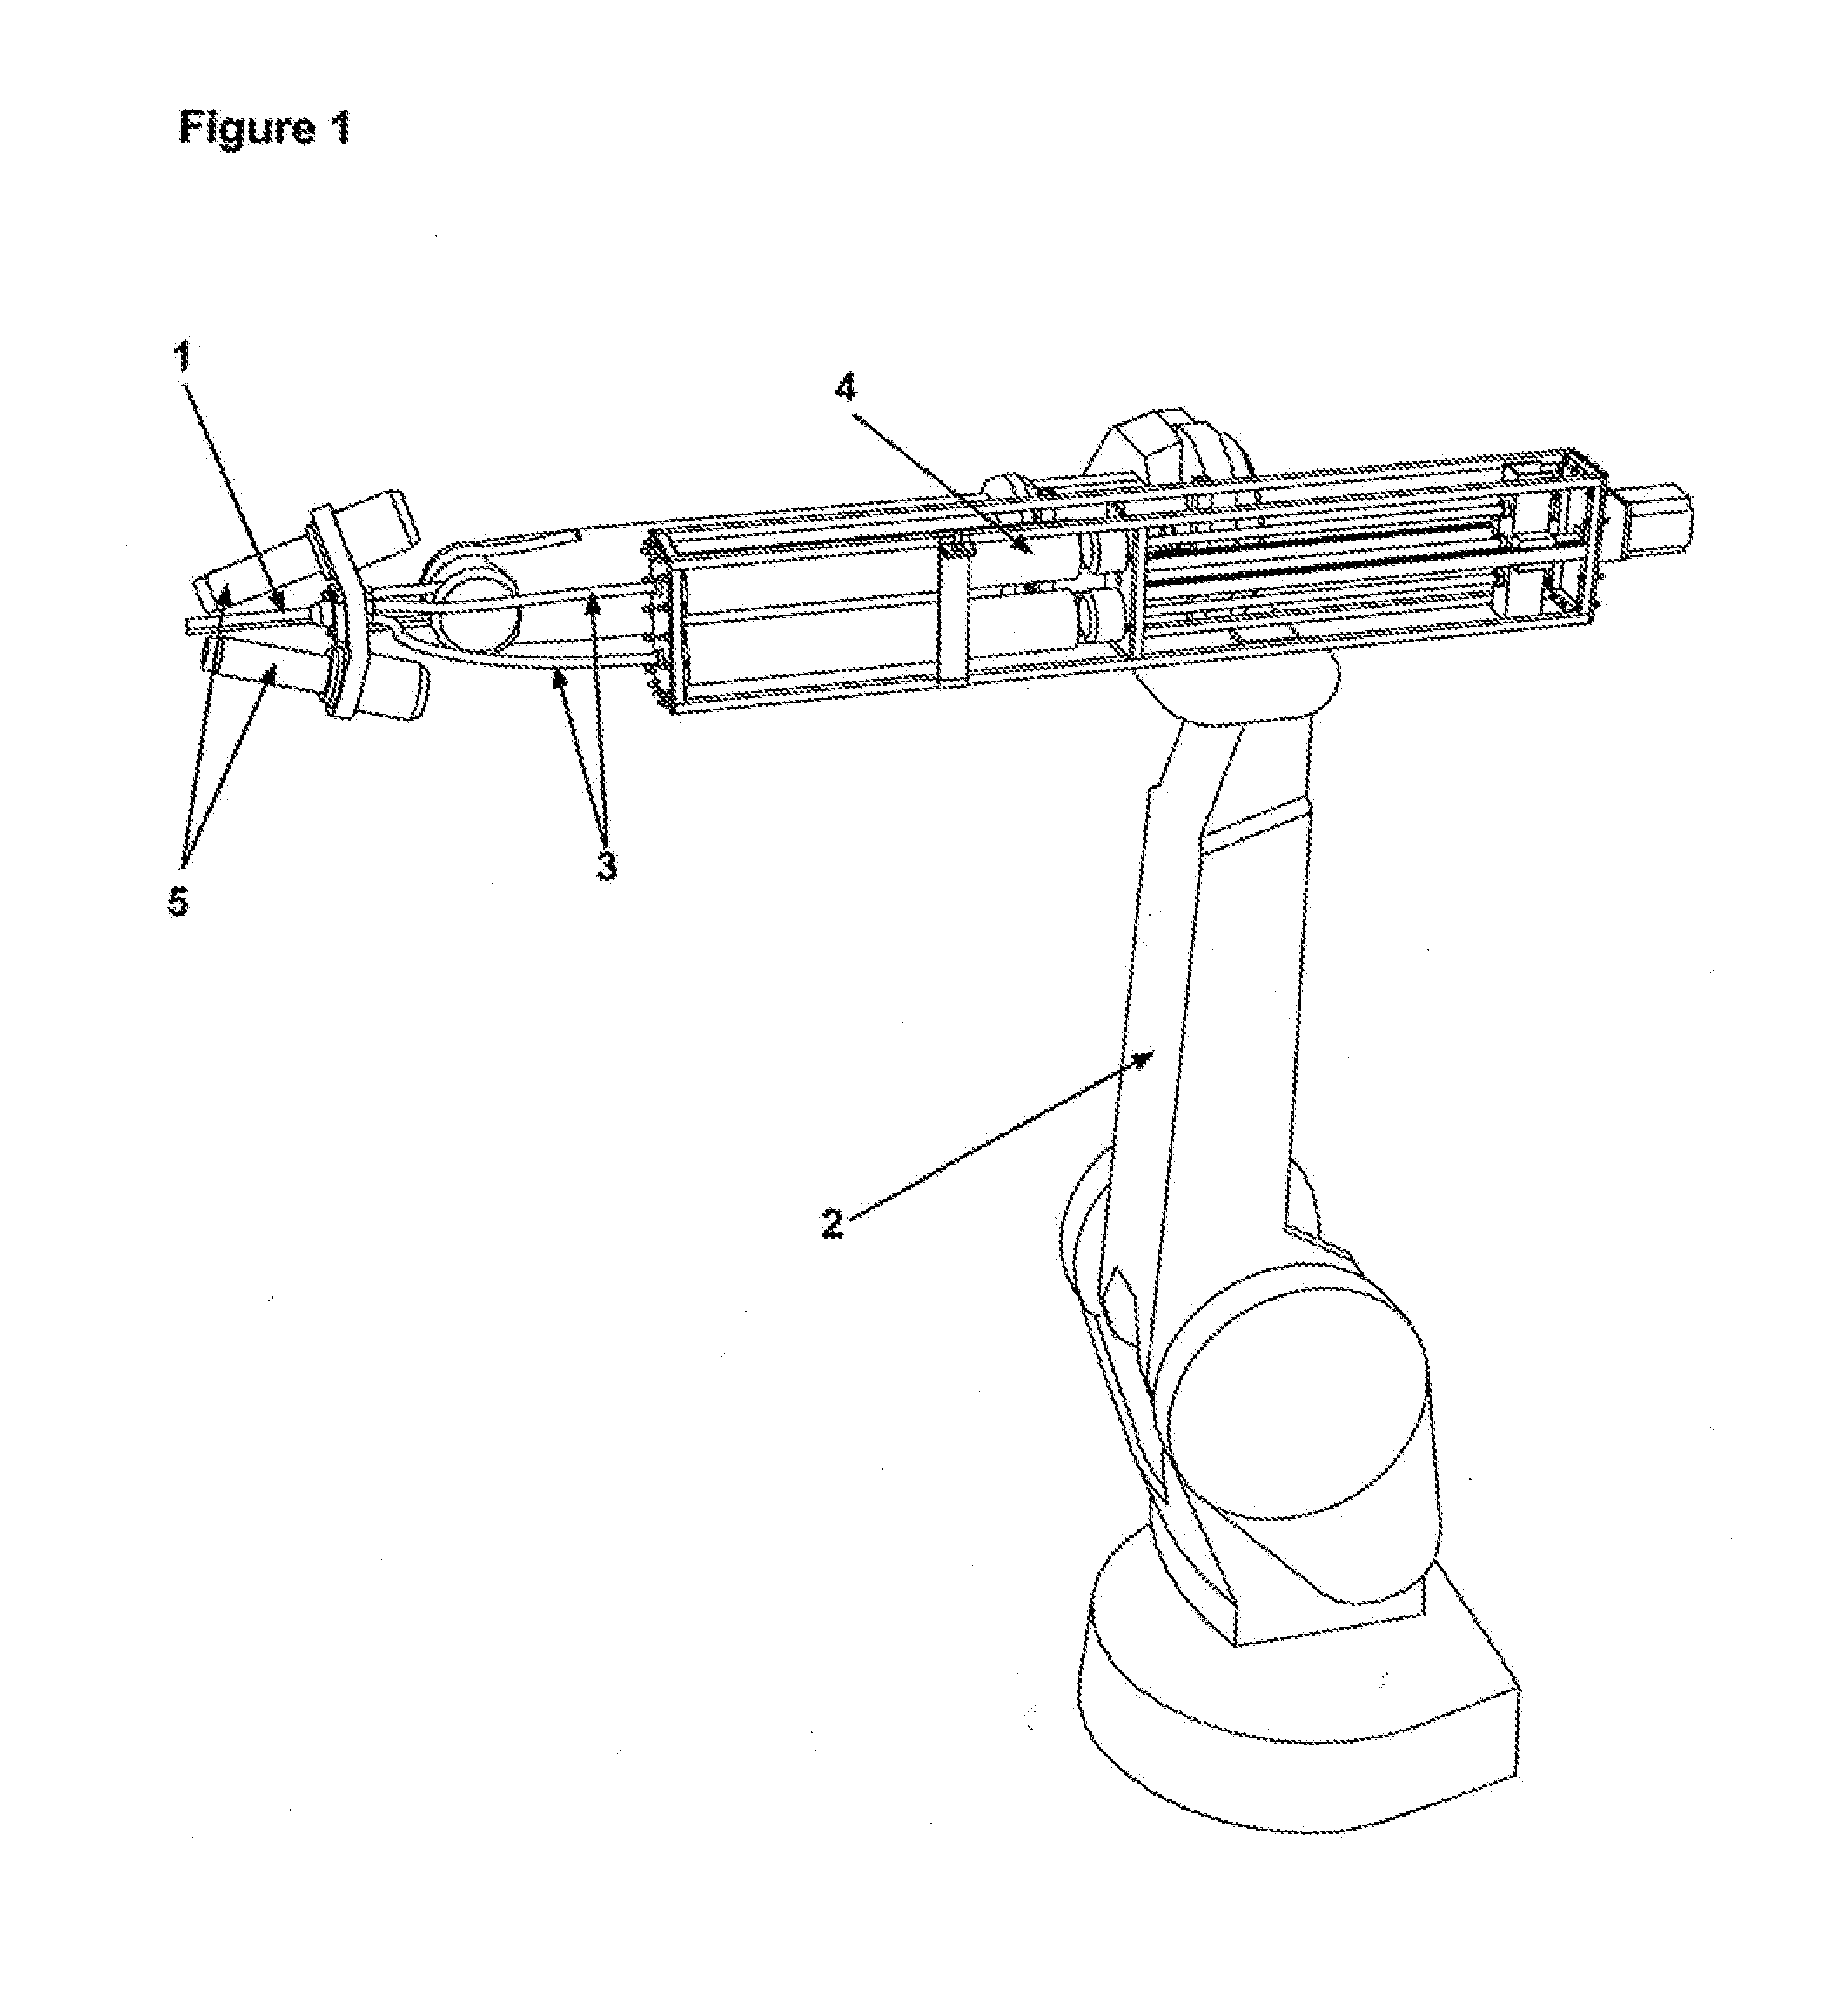 System and Method for Manufacturing a Three-Dimensional Object from Freely Formed Three-Dimensional Curves